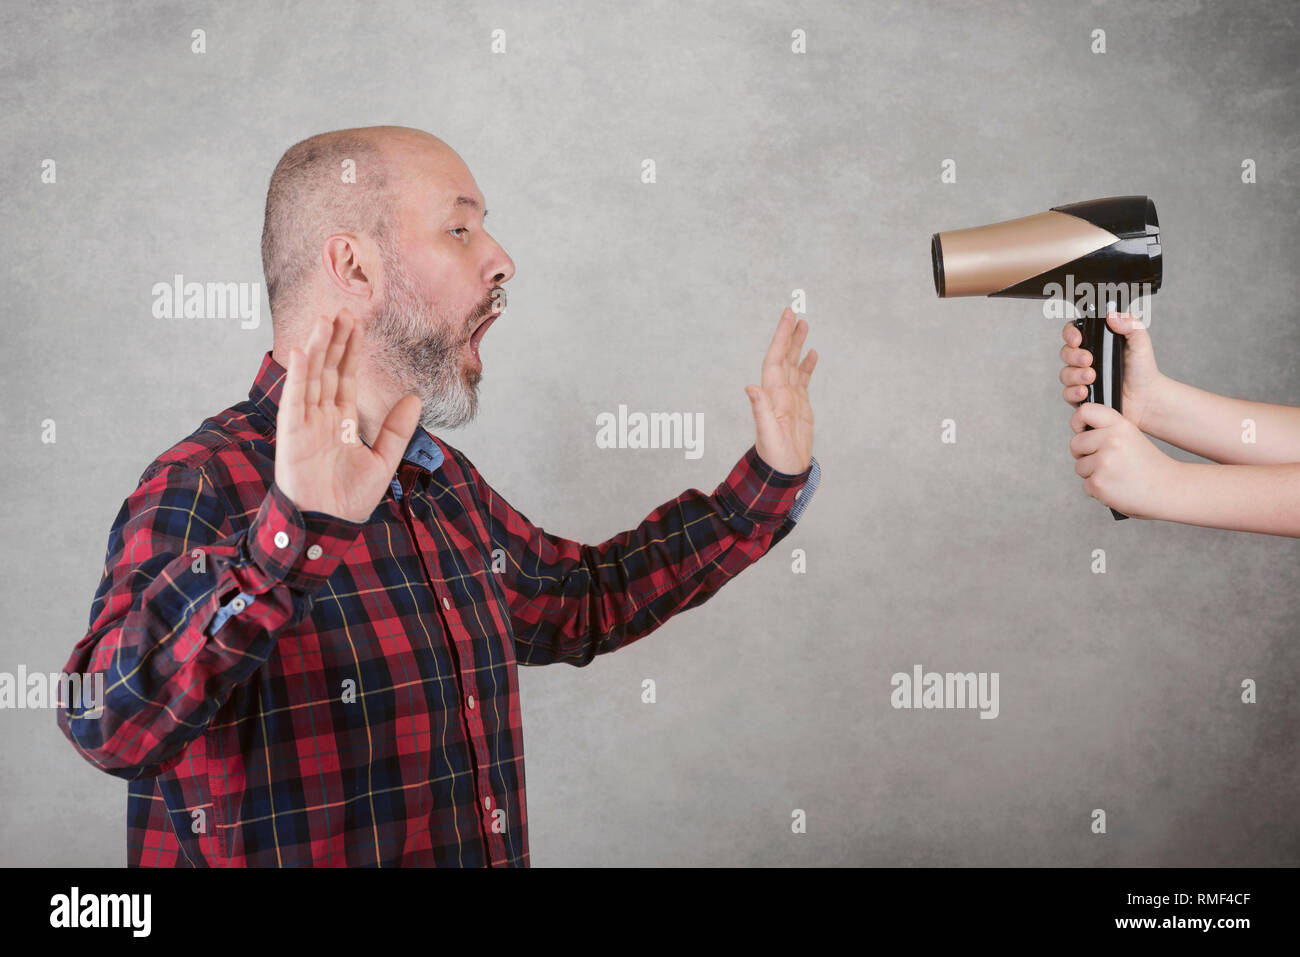 Surprised adult bald man next to a hair dryer against gray background Stock Photo